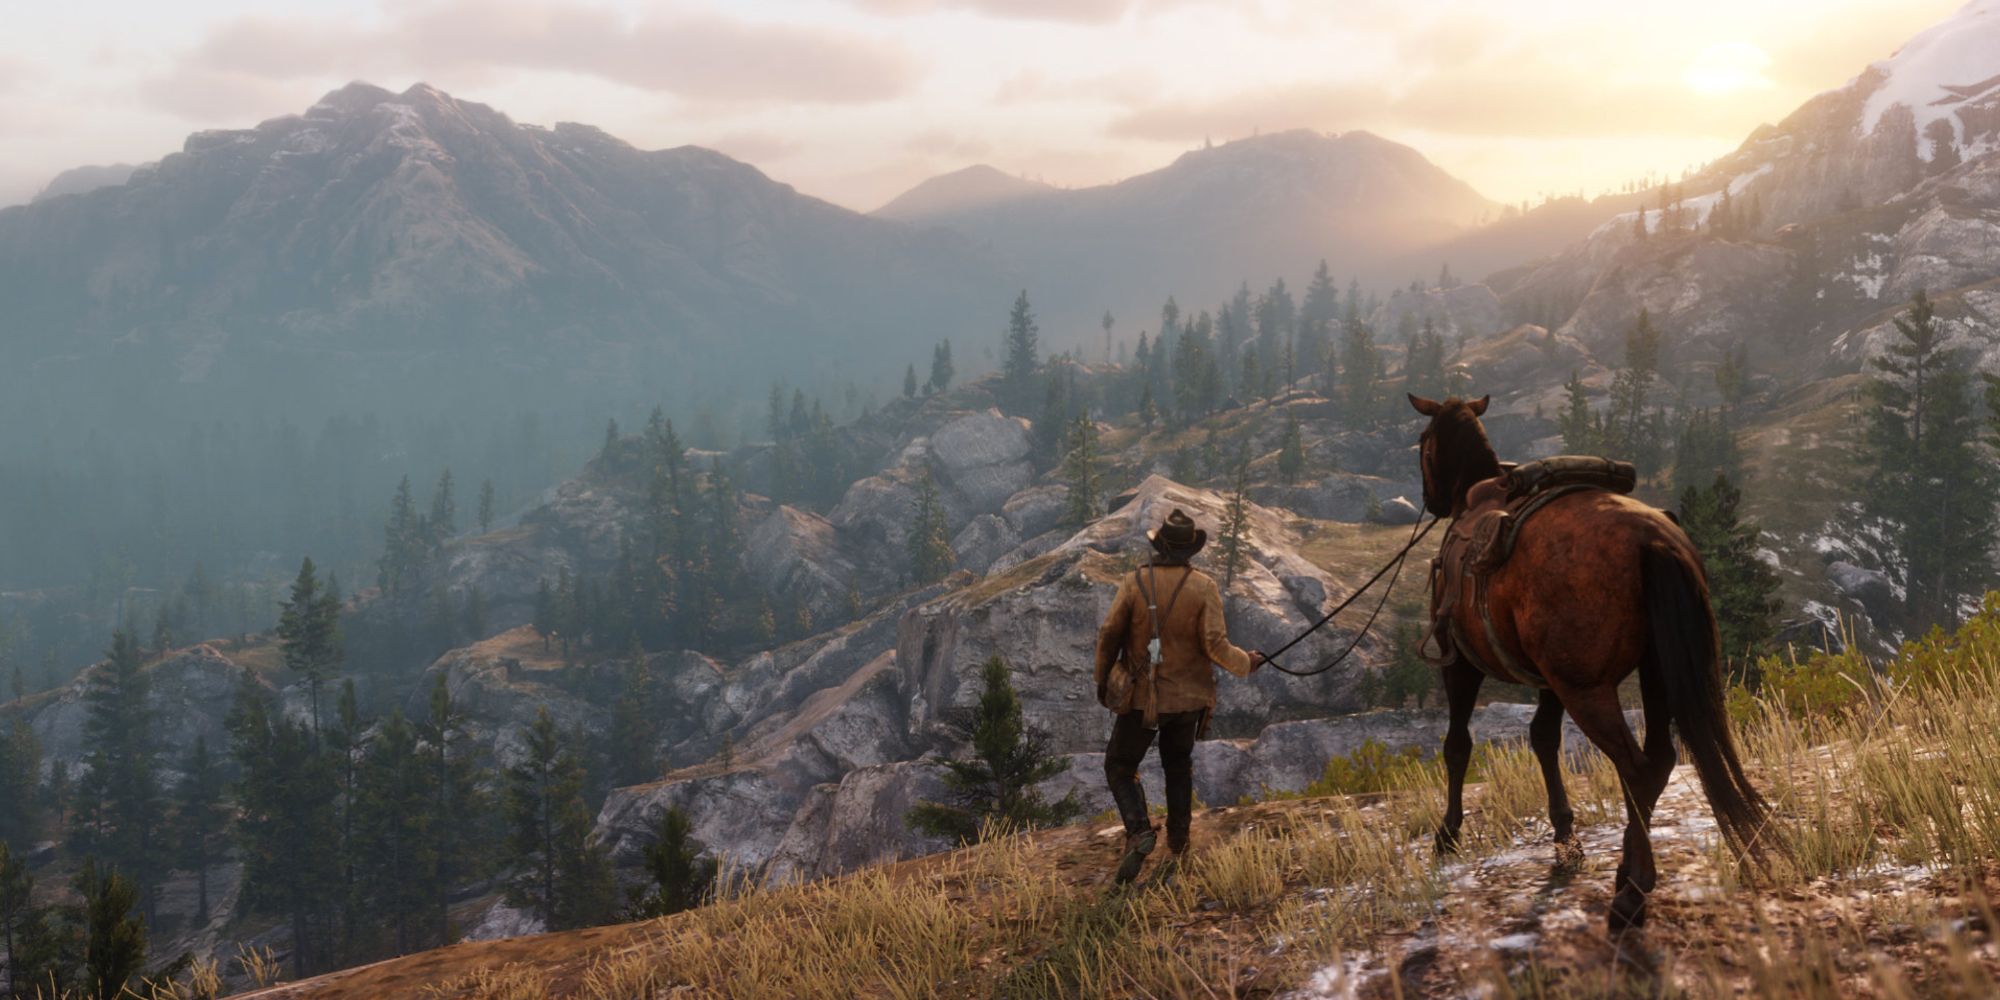 Arthur leading his horse on the top of a hill overlooking a mountainous landscape in Red Dead Redemption 2